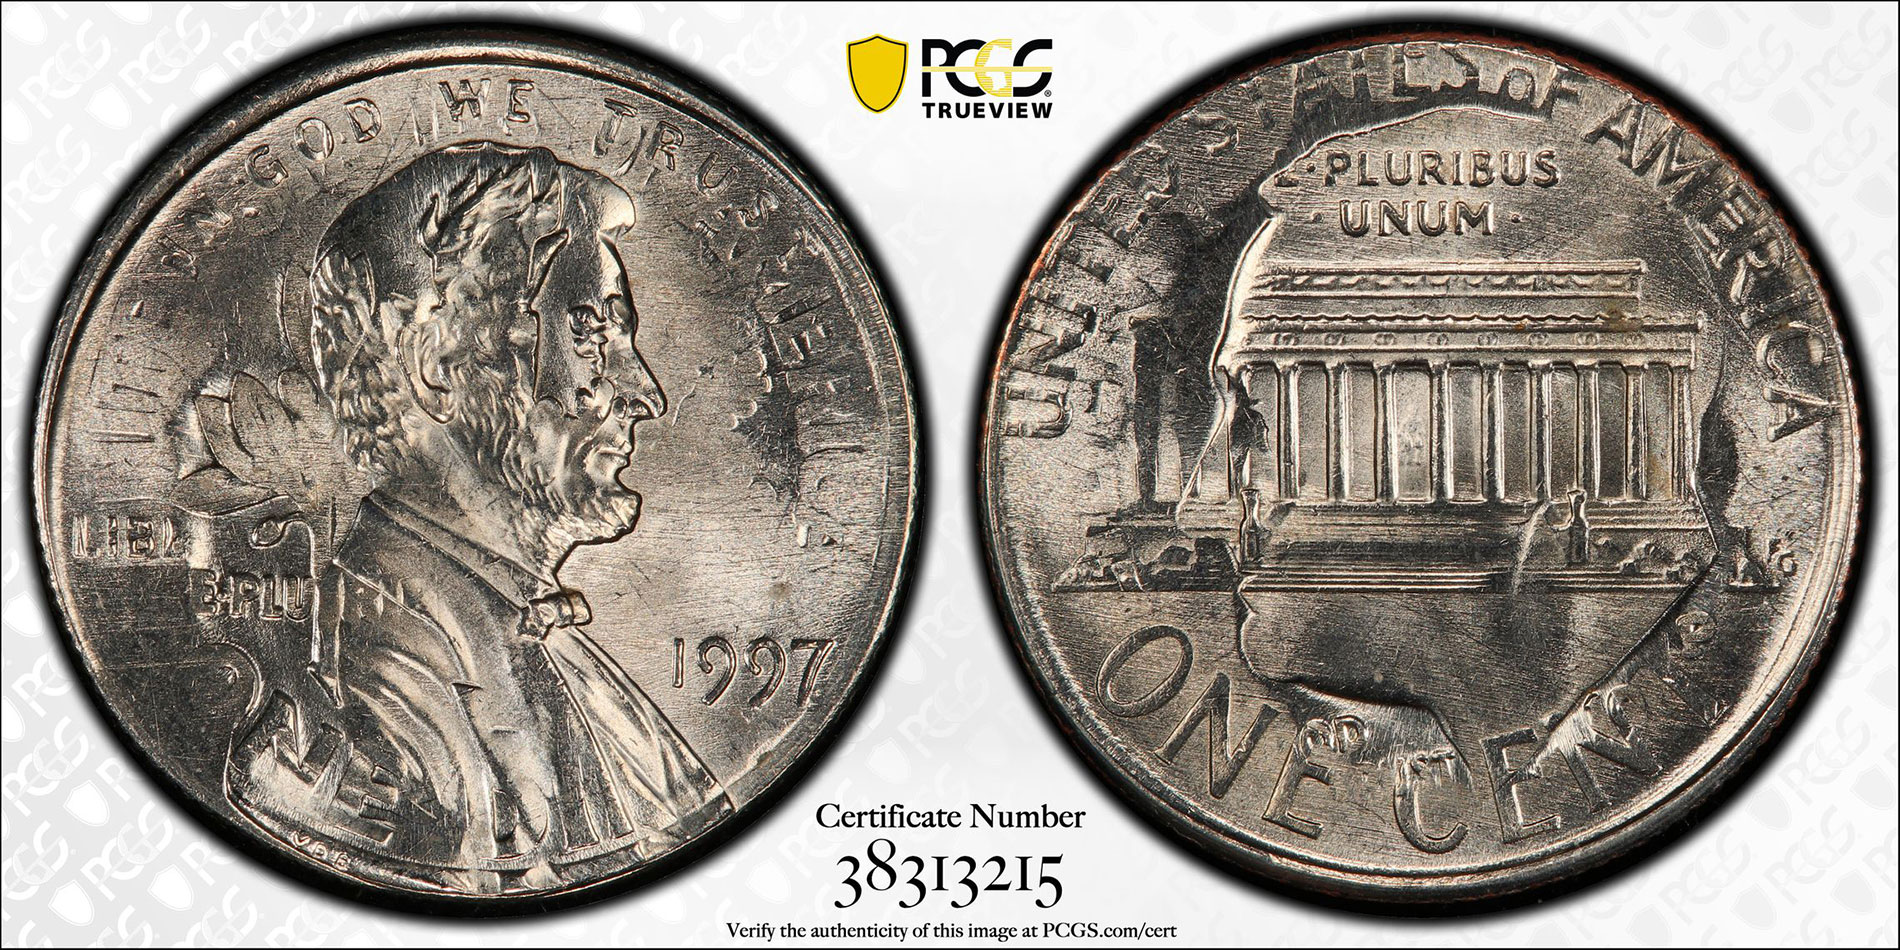 Find Out Your Coin Authenticity Grade and if it's a Valuable Error